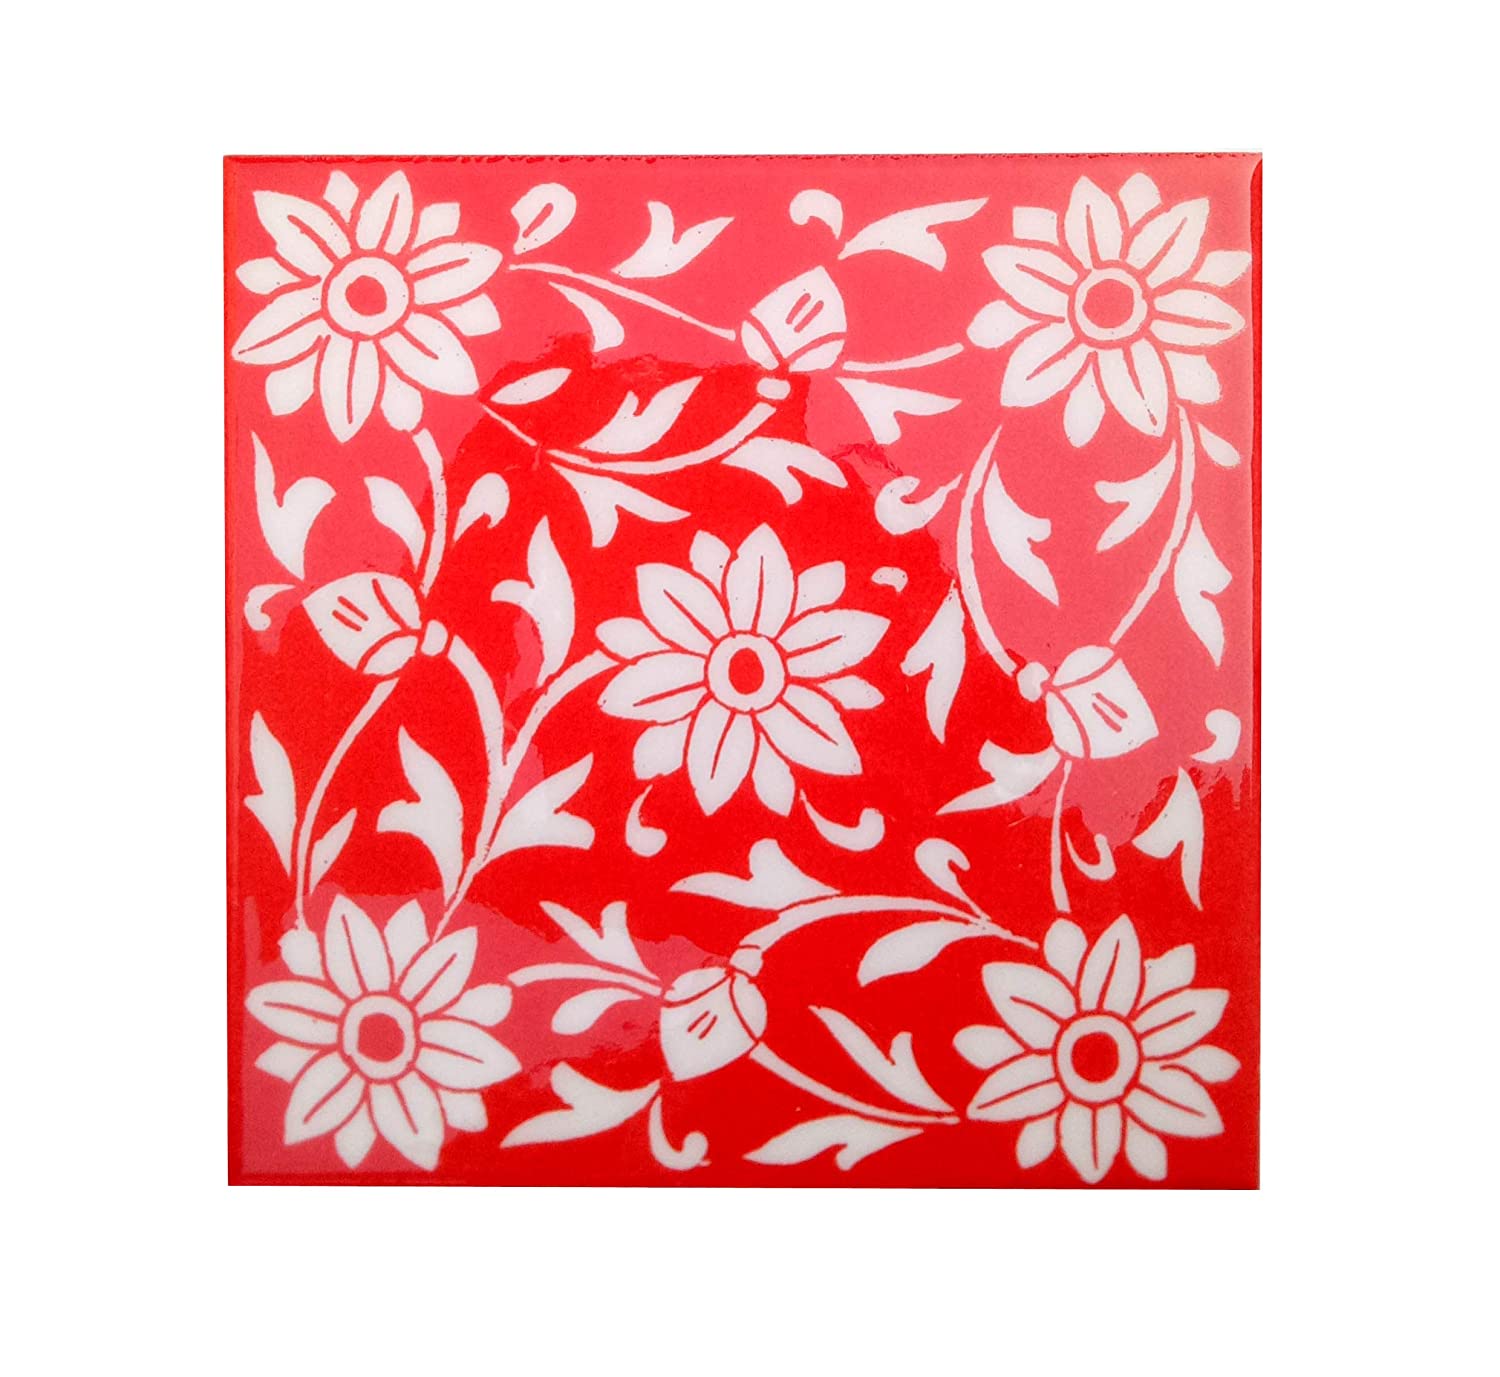 Amao 3D Mosaic Embossed Wallpaper Border Floral Wall Border Paper Peel and Stick Wall Tile Borders for Bathroom Kitchen Backsplash Sticker (Red)